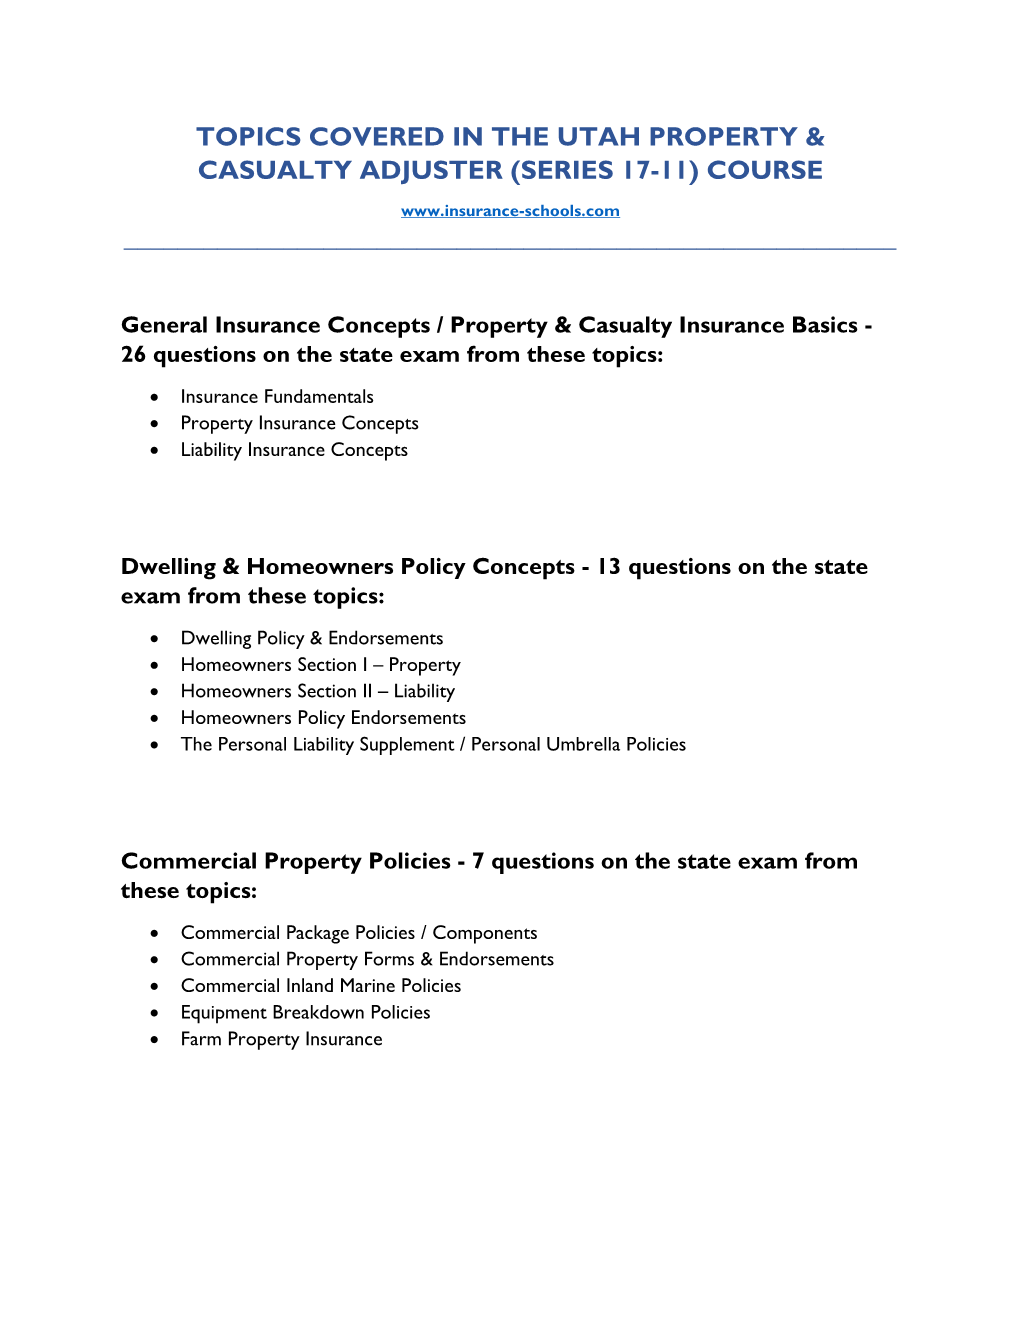 Topics Covered in the Utah Property & Casualty